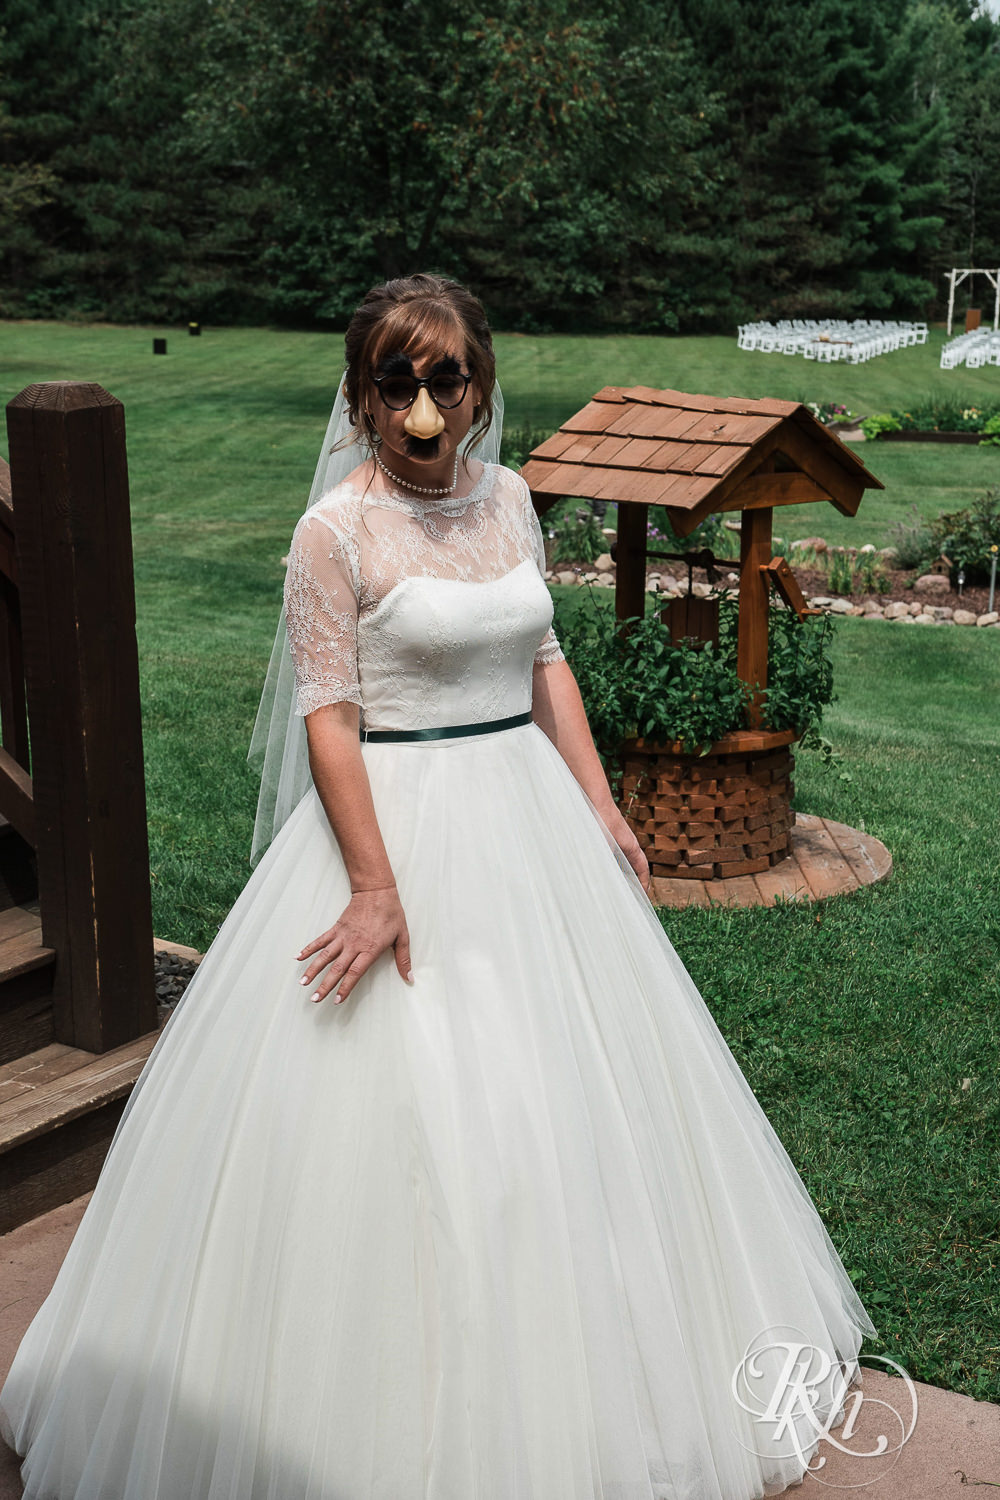 Bride wears a Groucho Marx mask for first look on wedding day in Elk Mound, Wisconsin.